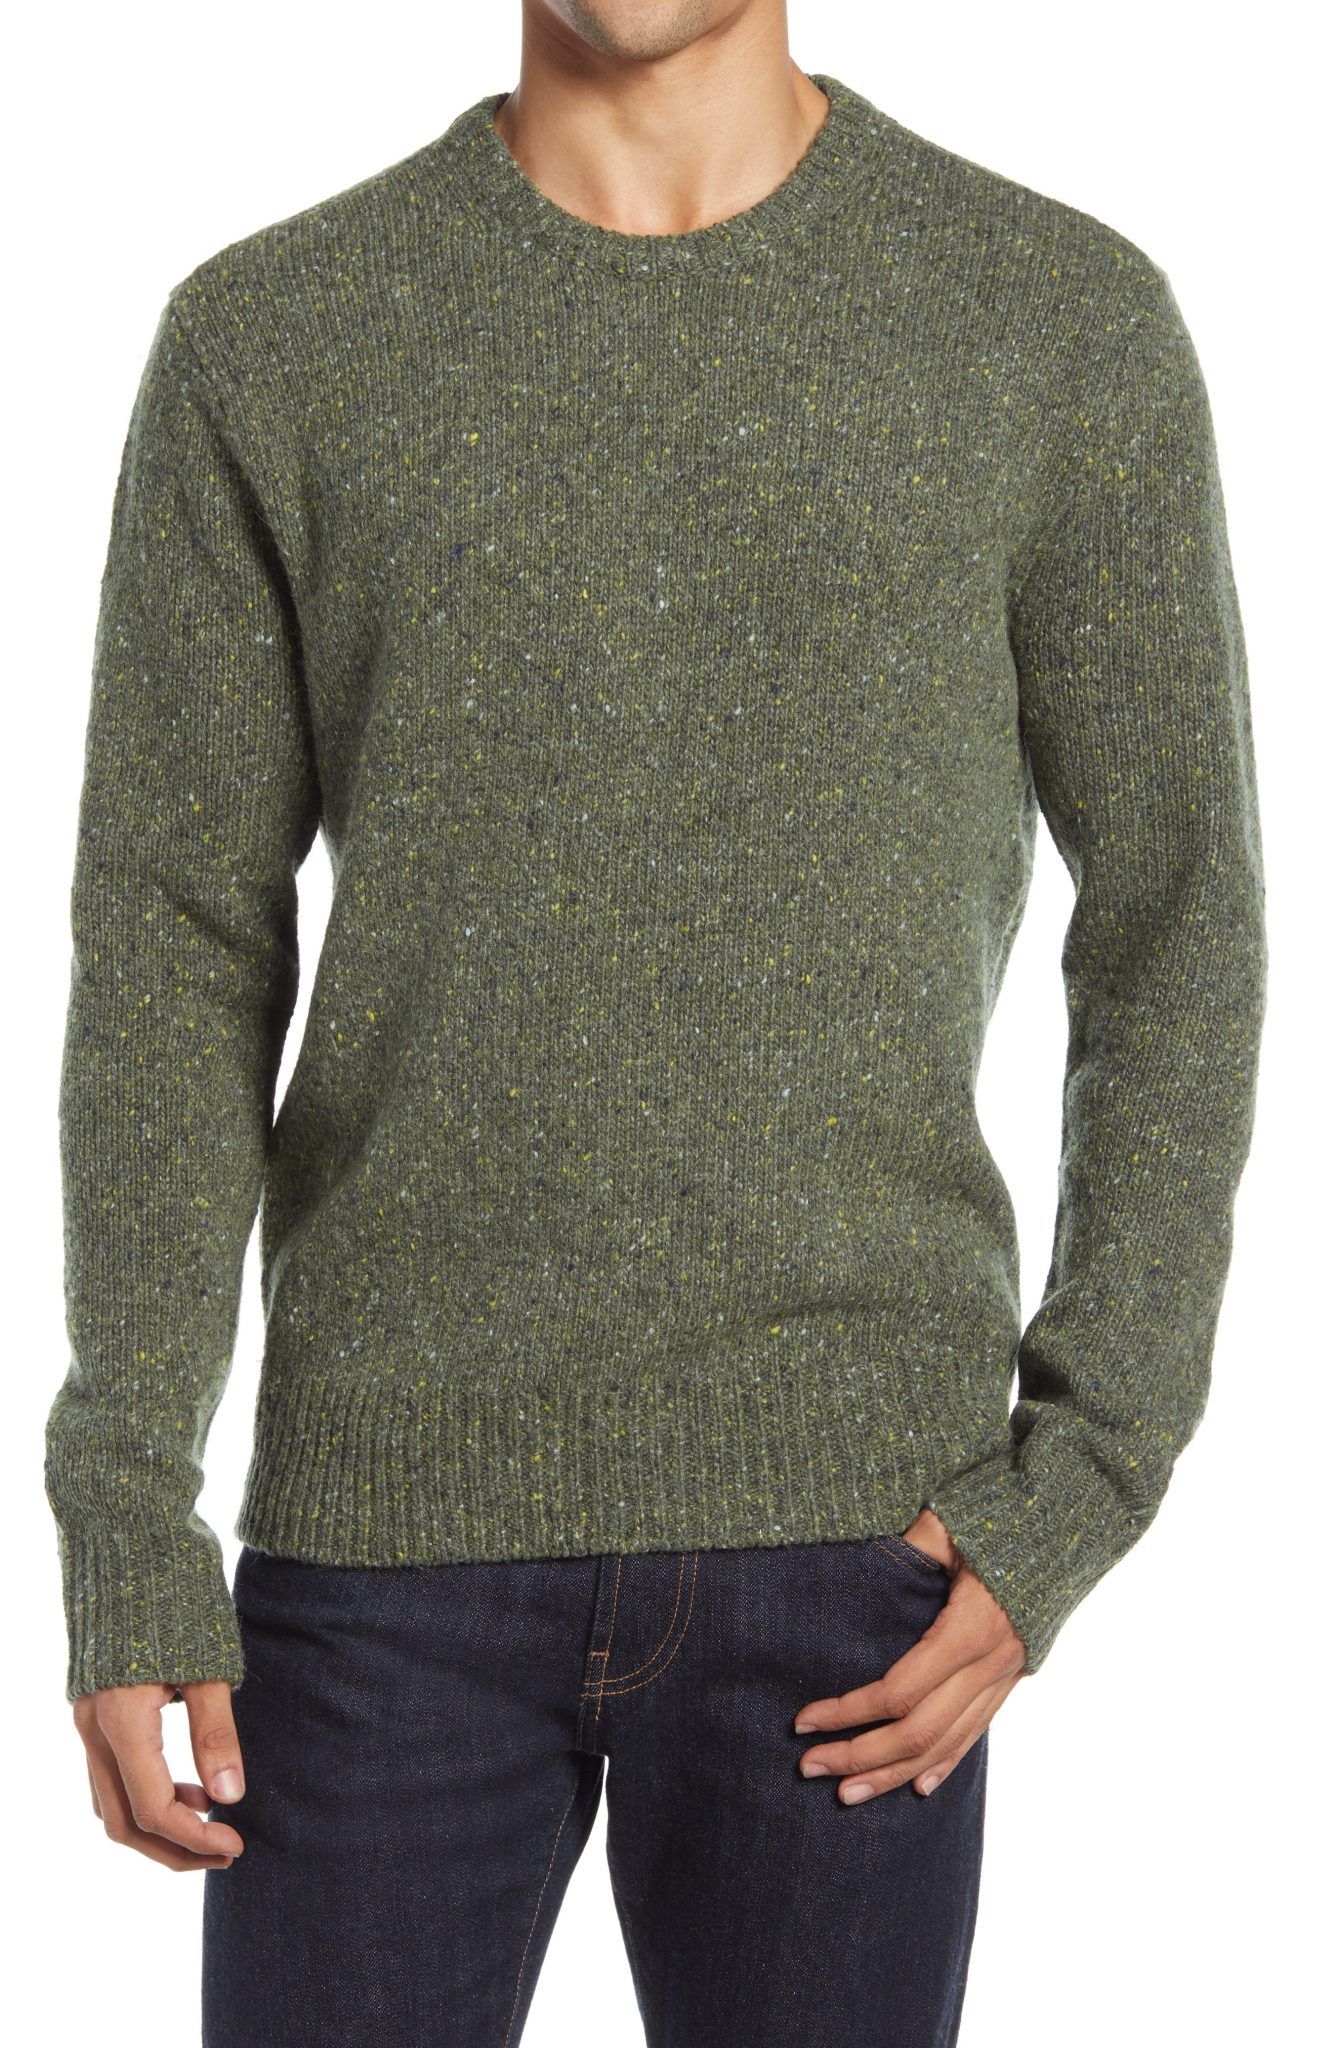 Men’s Madewell Crewneck Sweater, Size XX-Large - Green | The Fashionisto